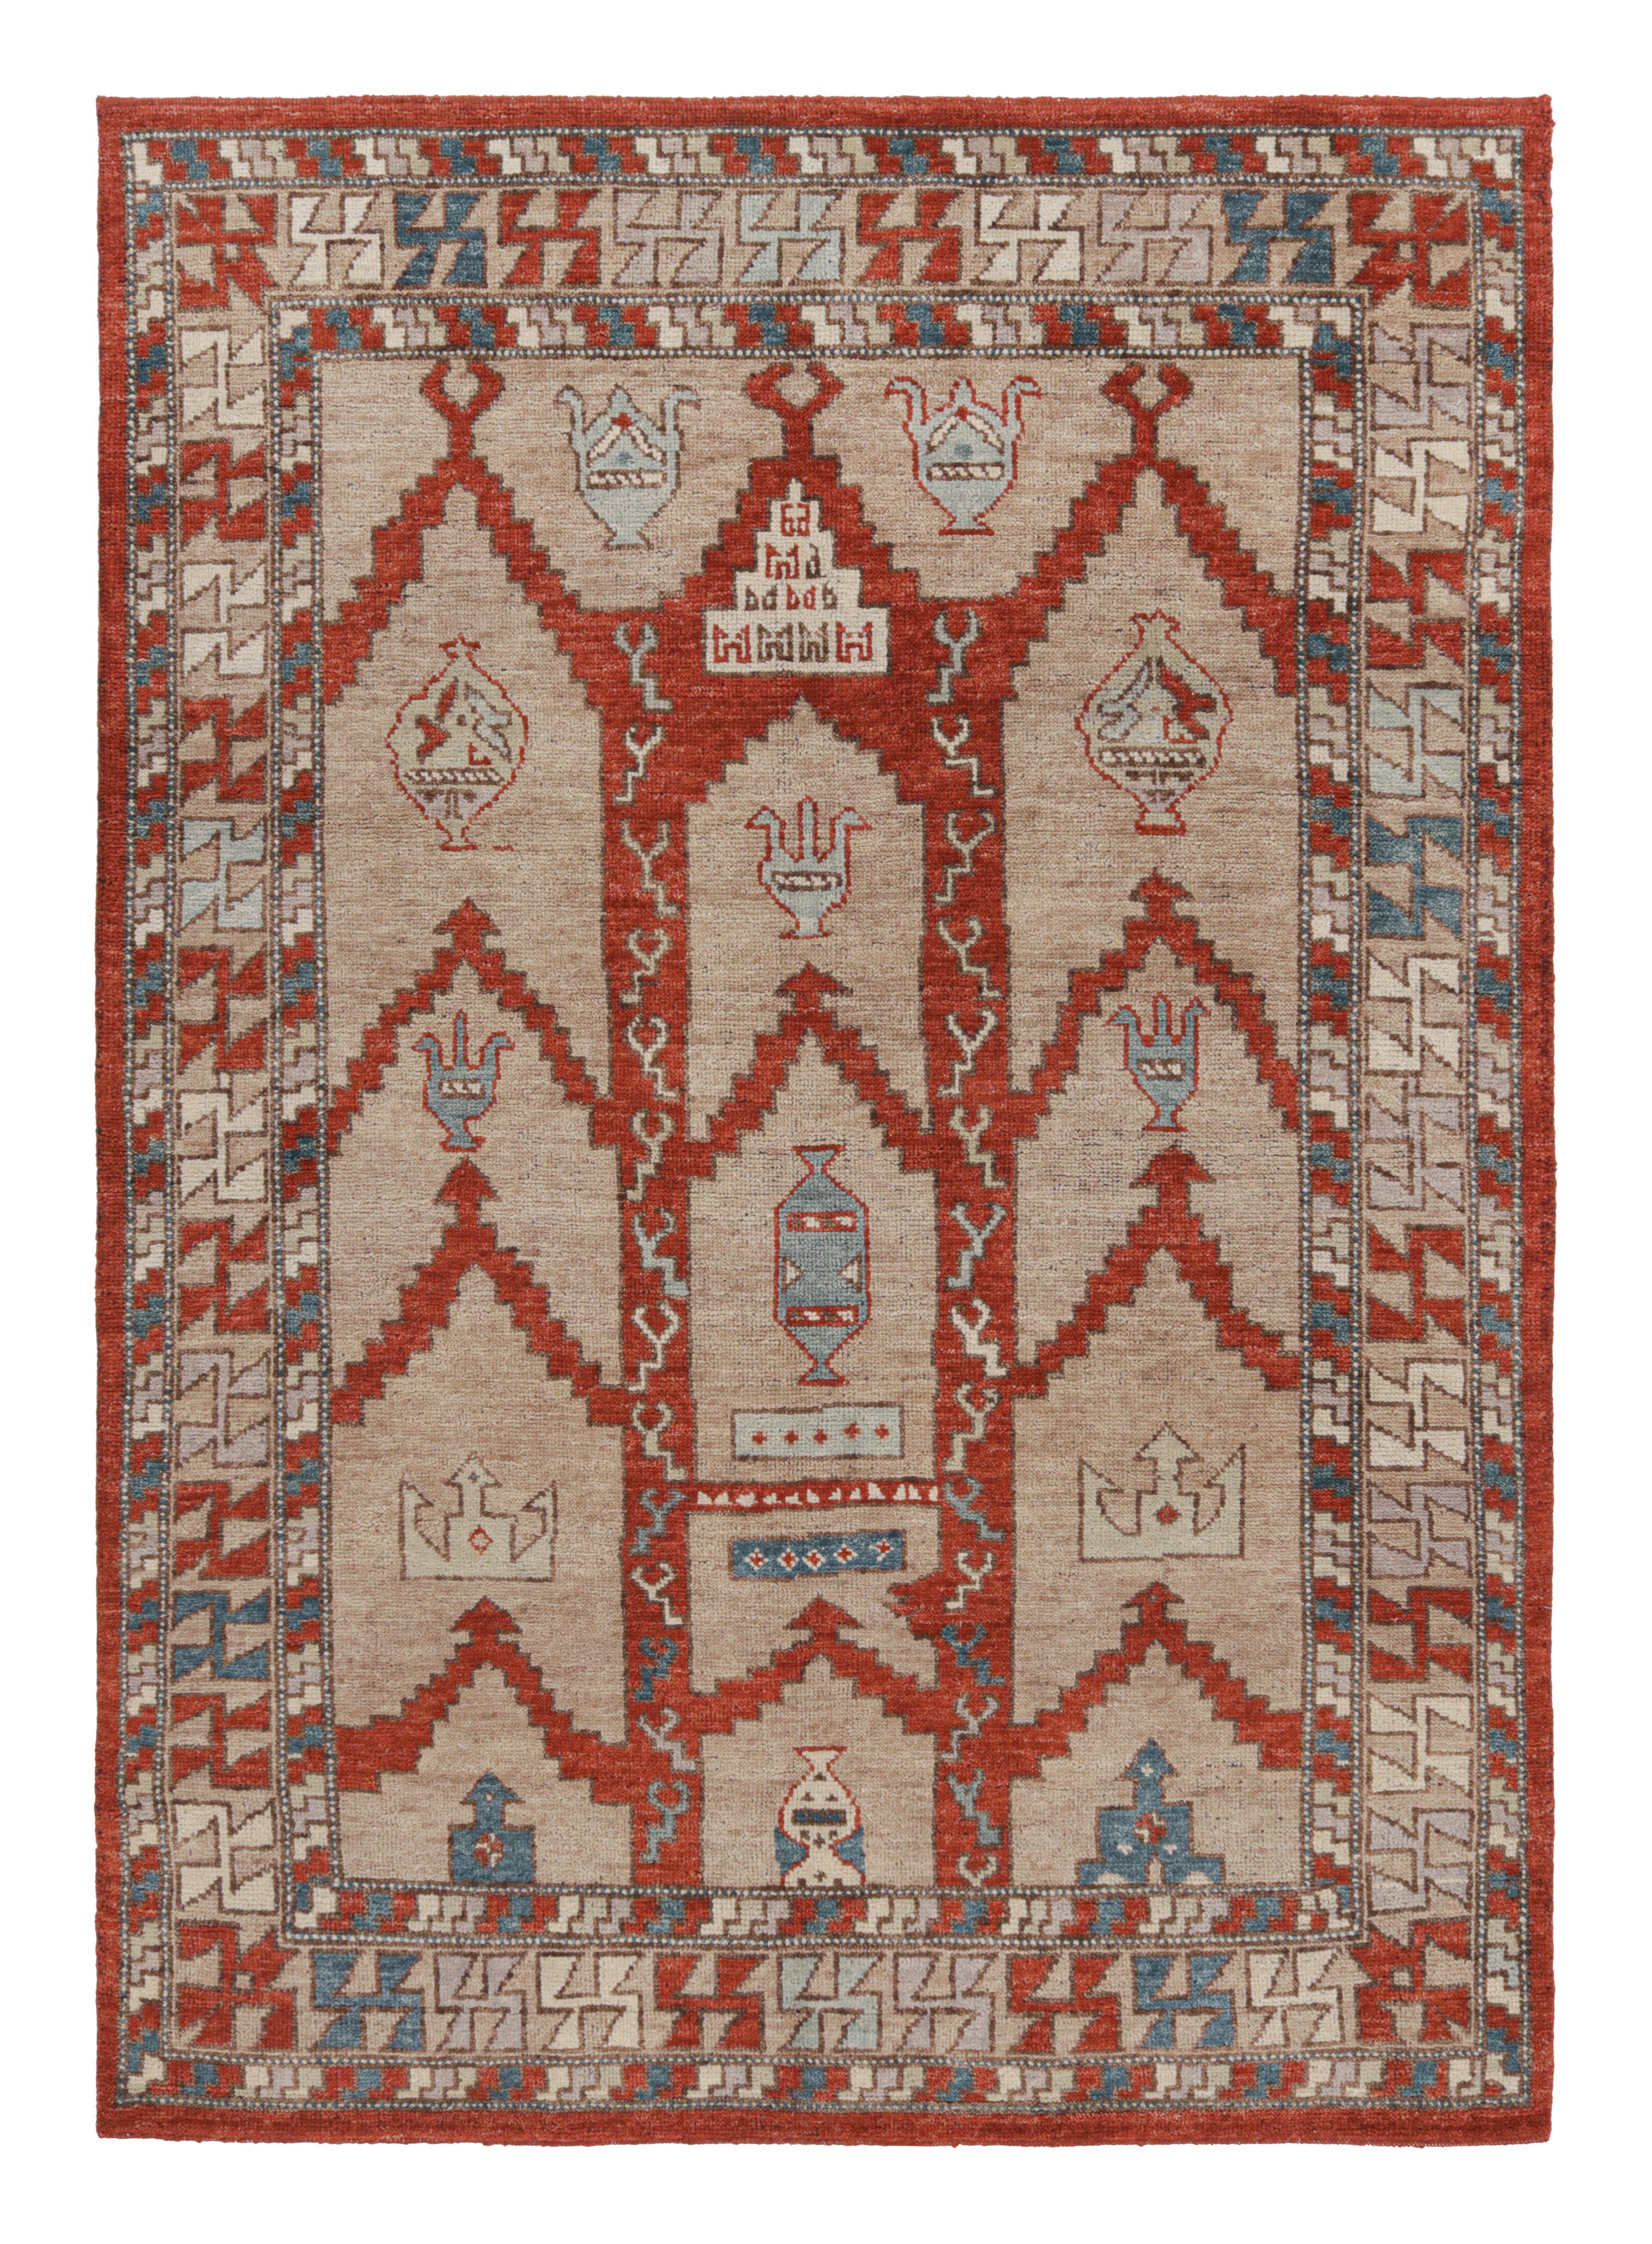 Rug & Kilim’s Tribal Style Rug in Red and Beige-Brown All over Geometric Pattern For Sale